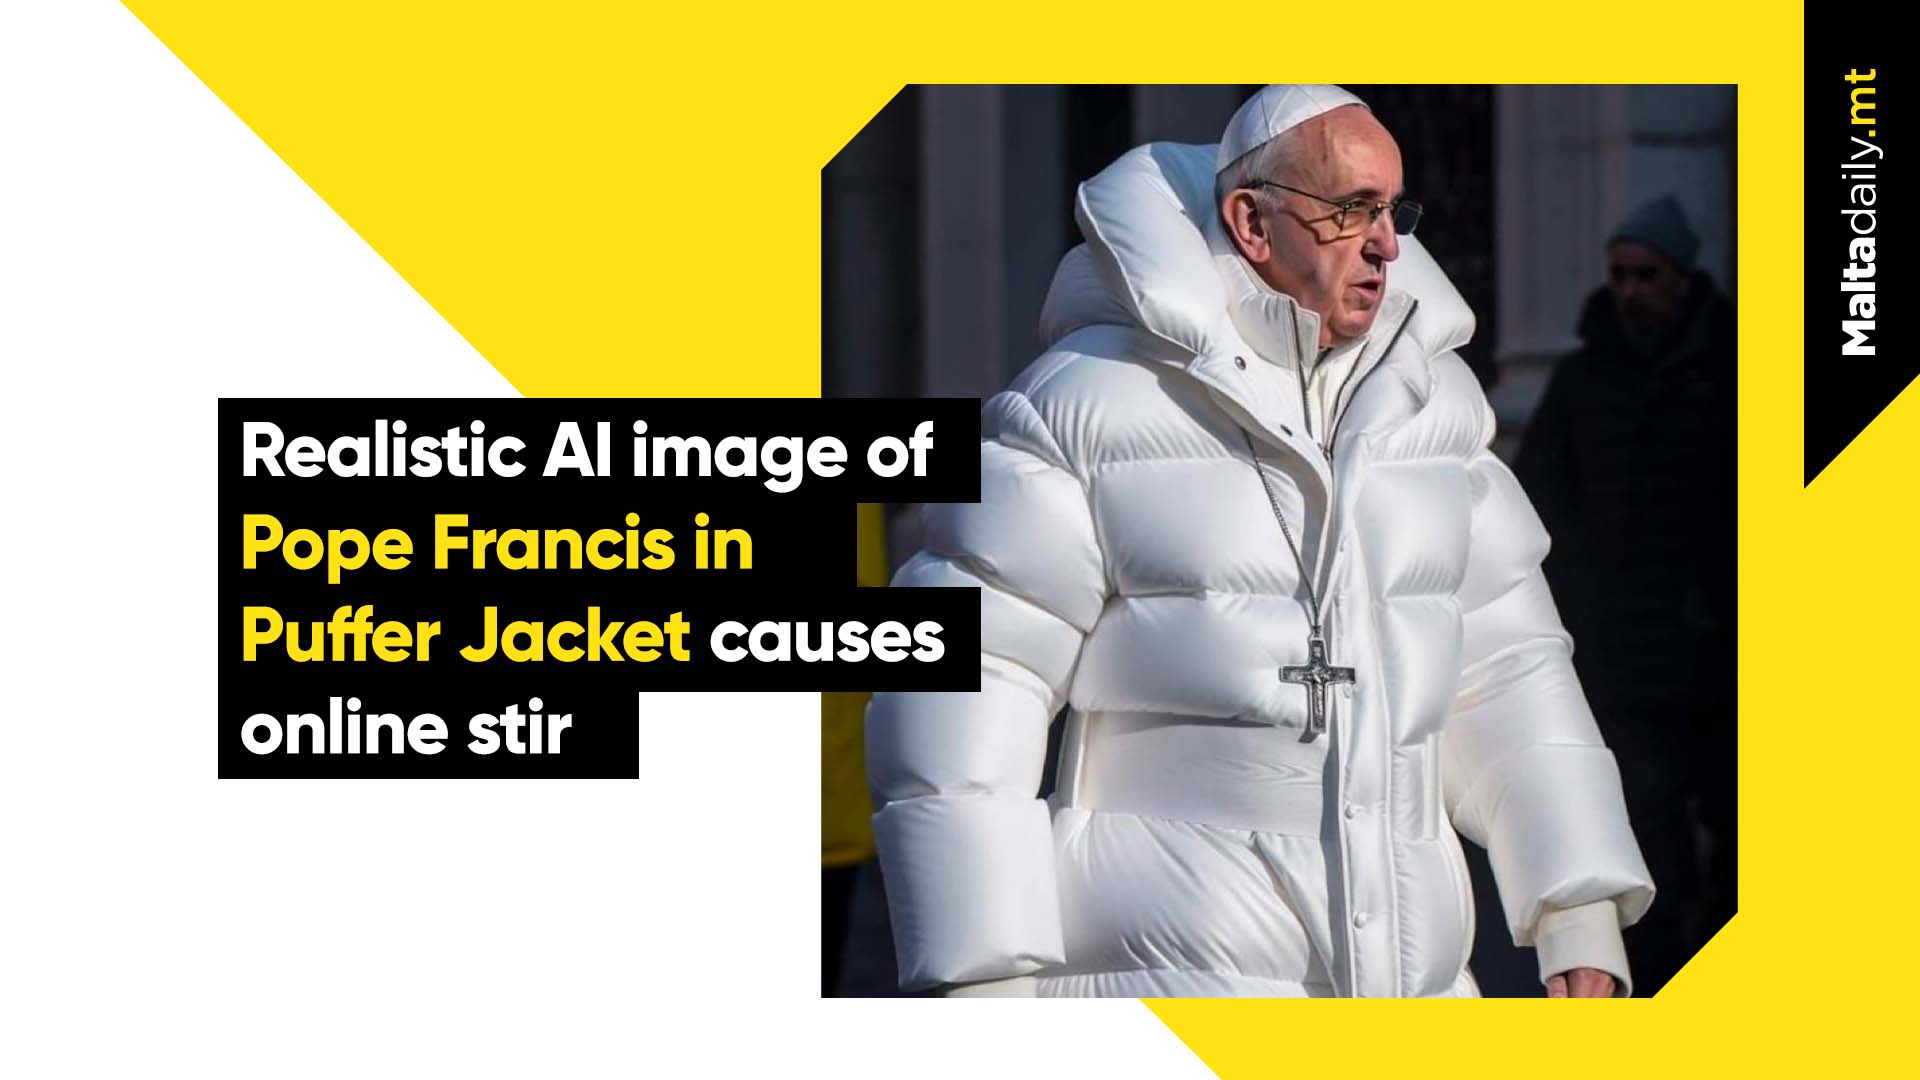 Realistic AI image of Pope Francis causes online stir